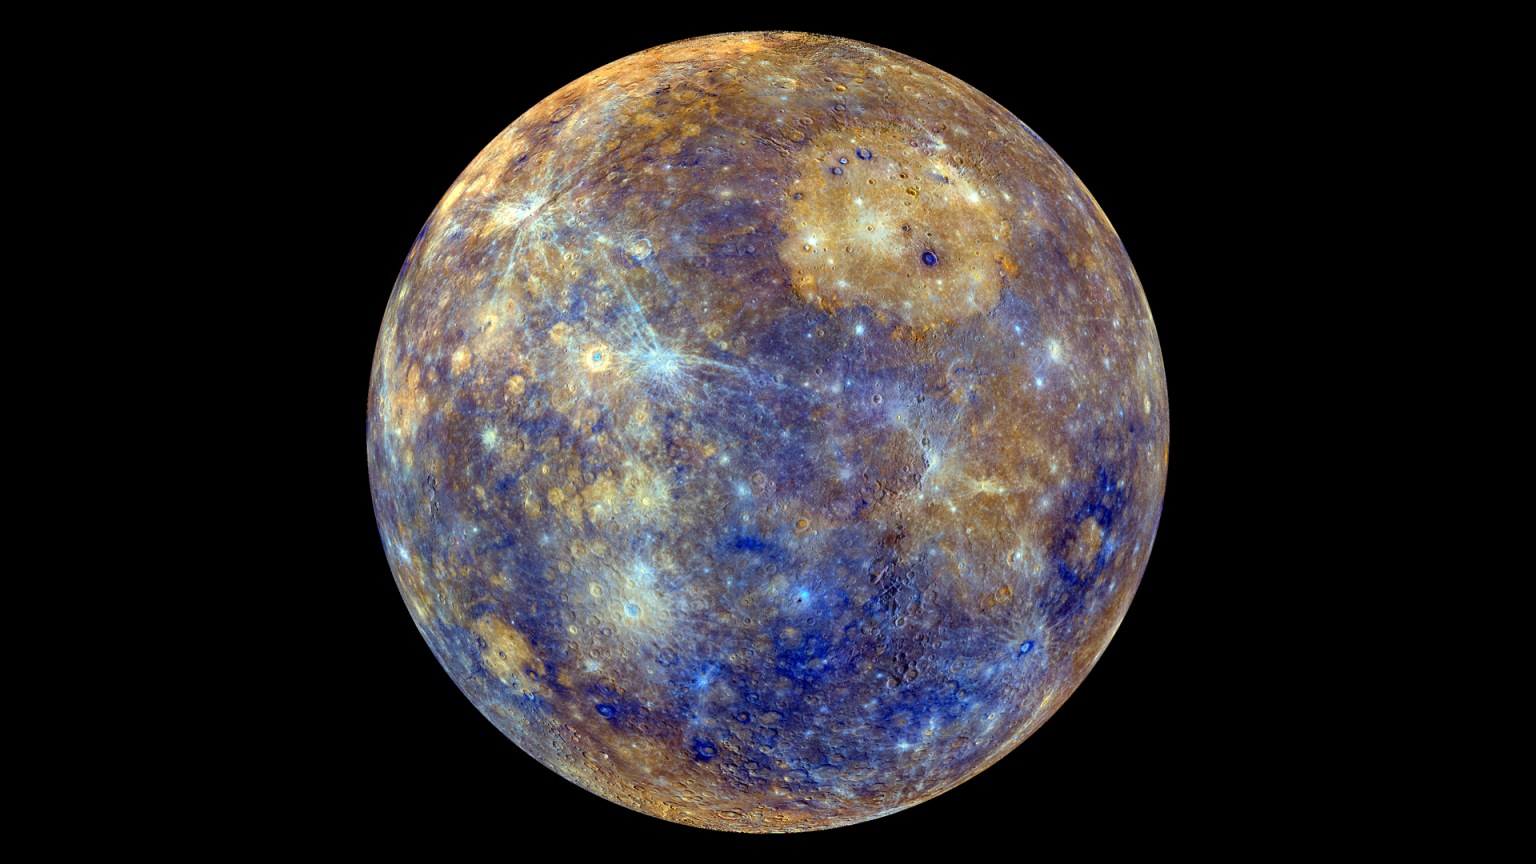 This view of Mercury was produced by using images from the color base map imaging campaign during MESSENGER's primary mission.